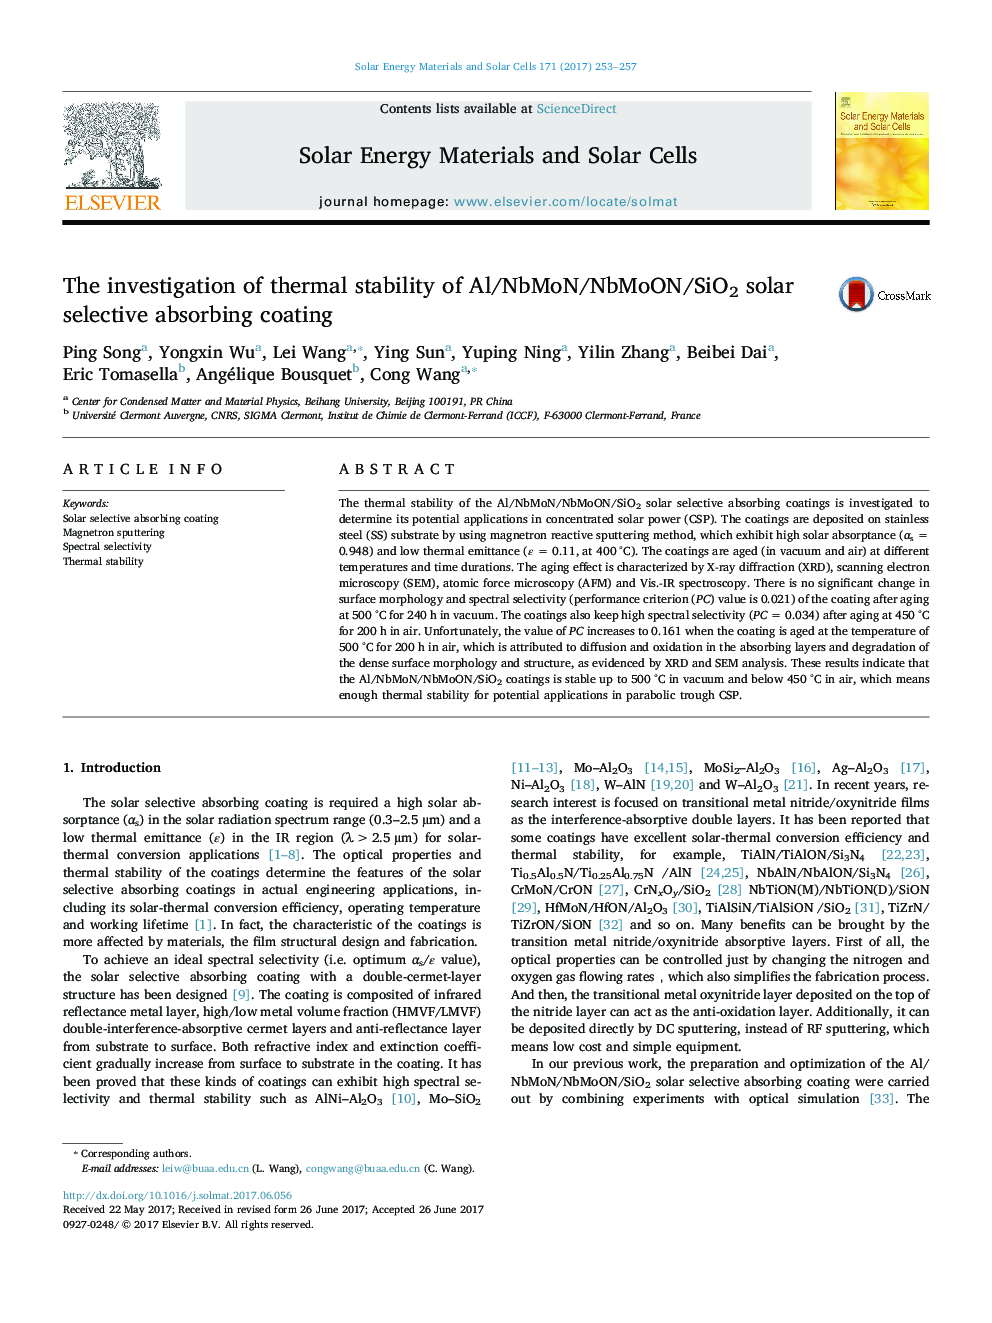 The investigation of thermal stability of Al/NbMoN/NbMoON/SiO2 solar selective absorbing coating